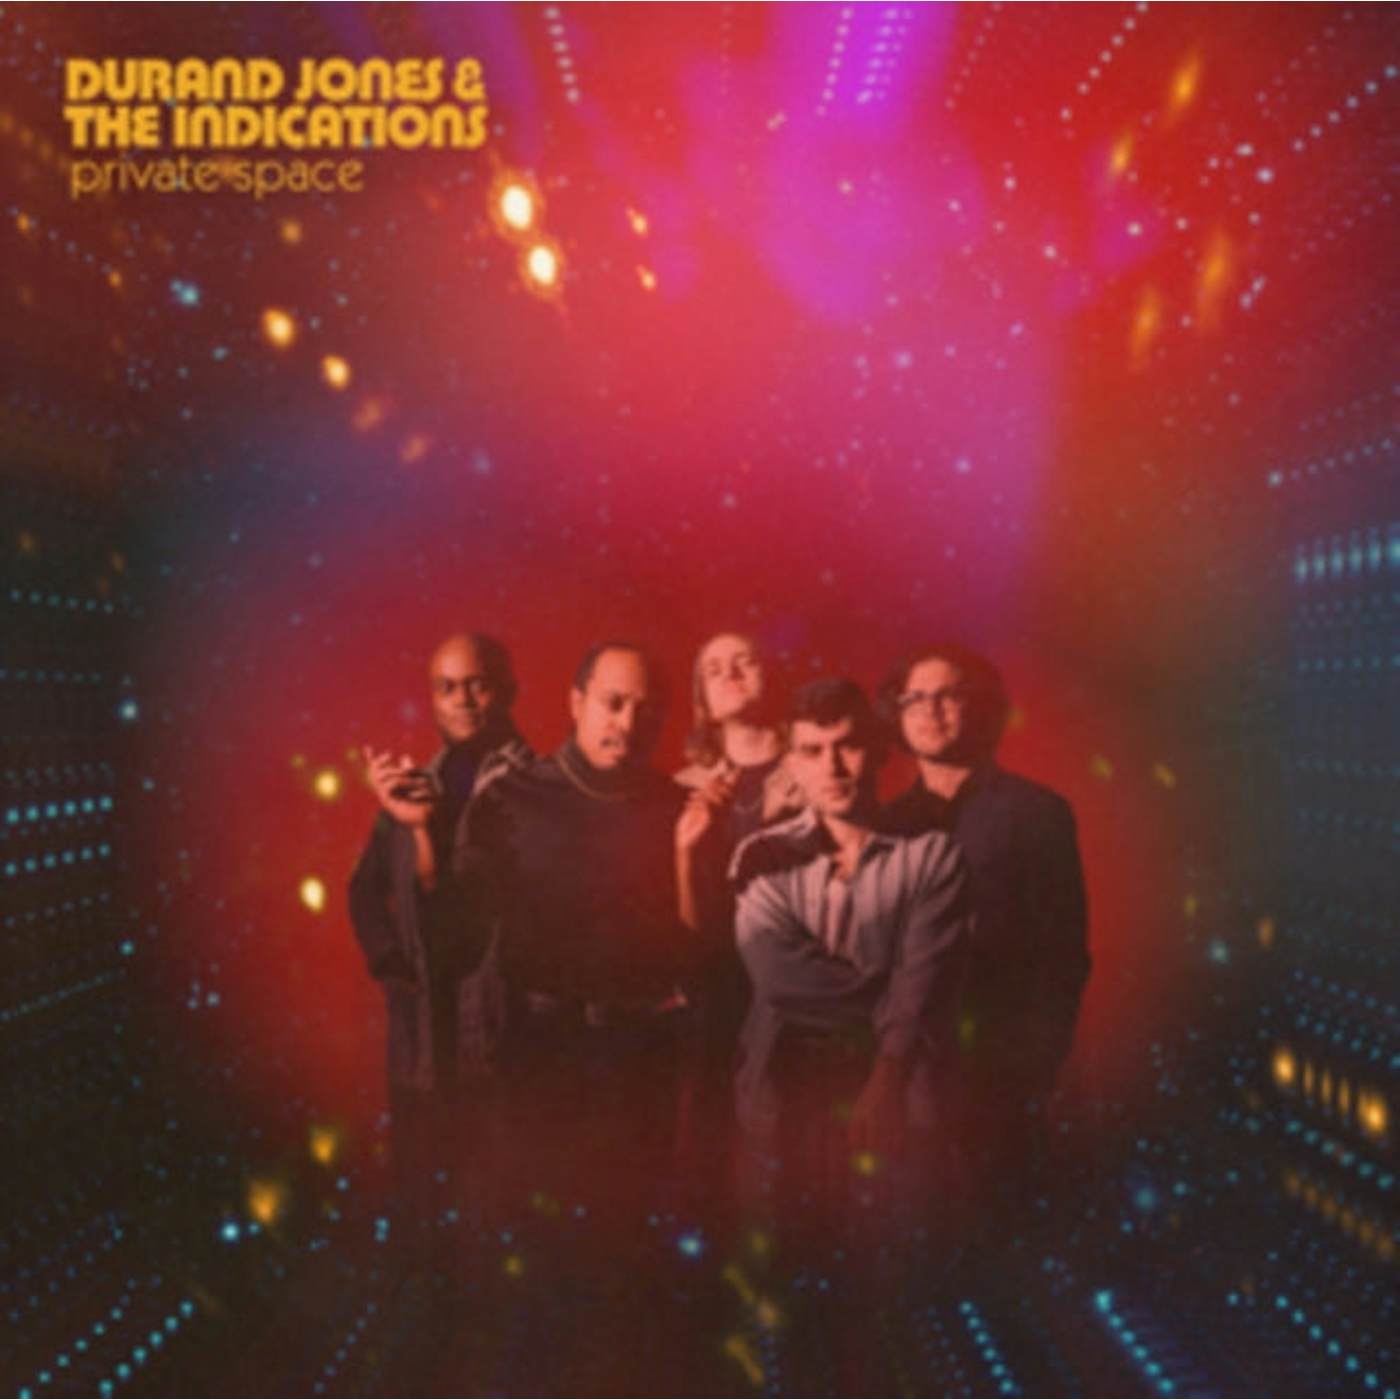 Durand Jones & The Indications CD - Private Space